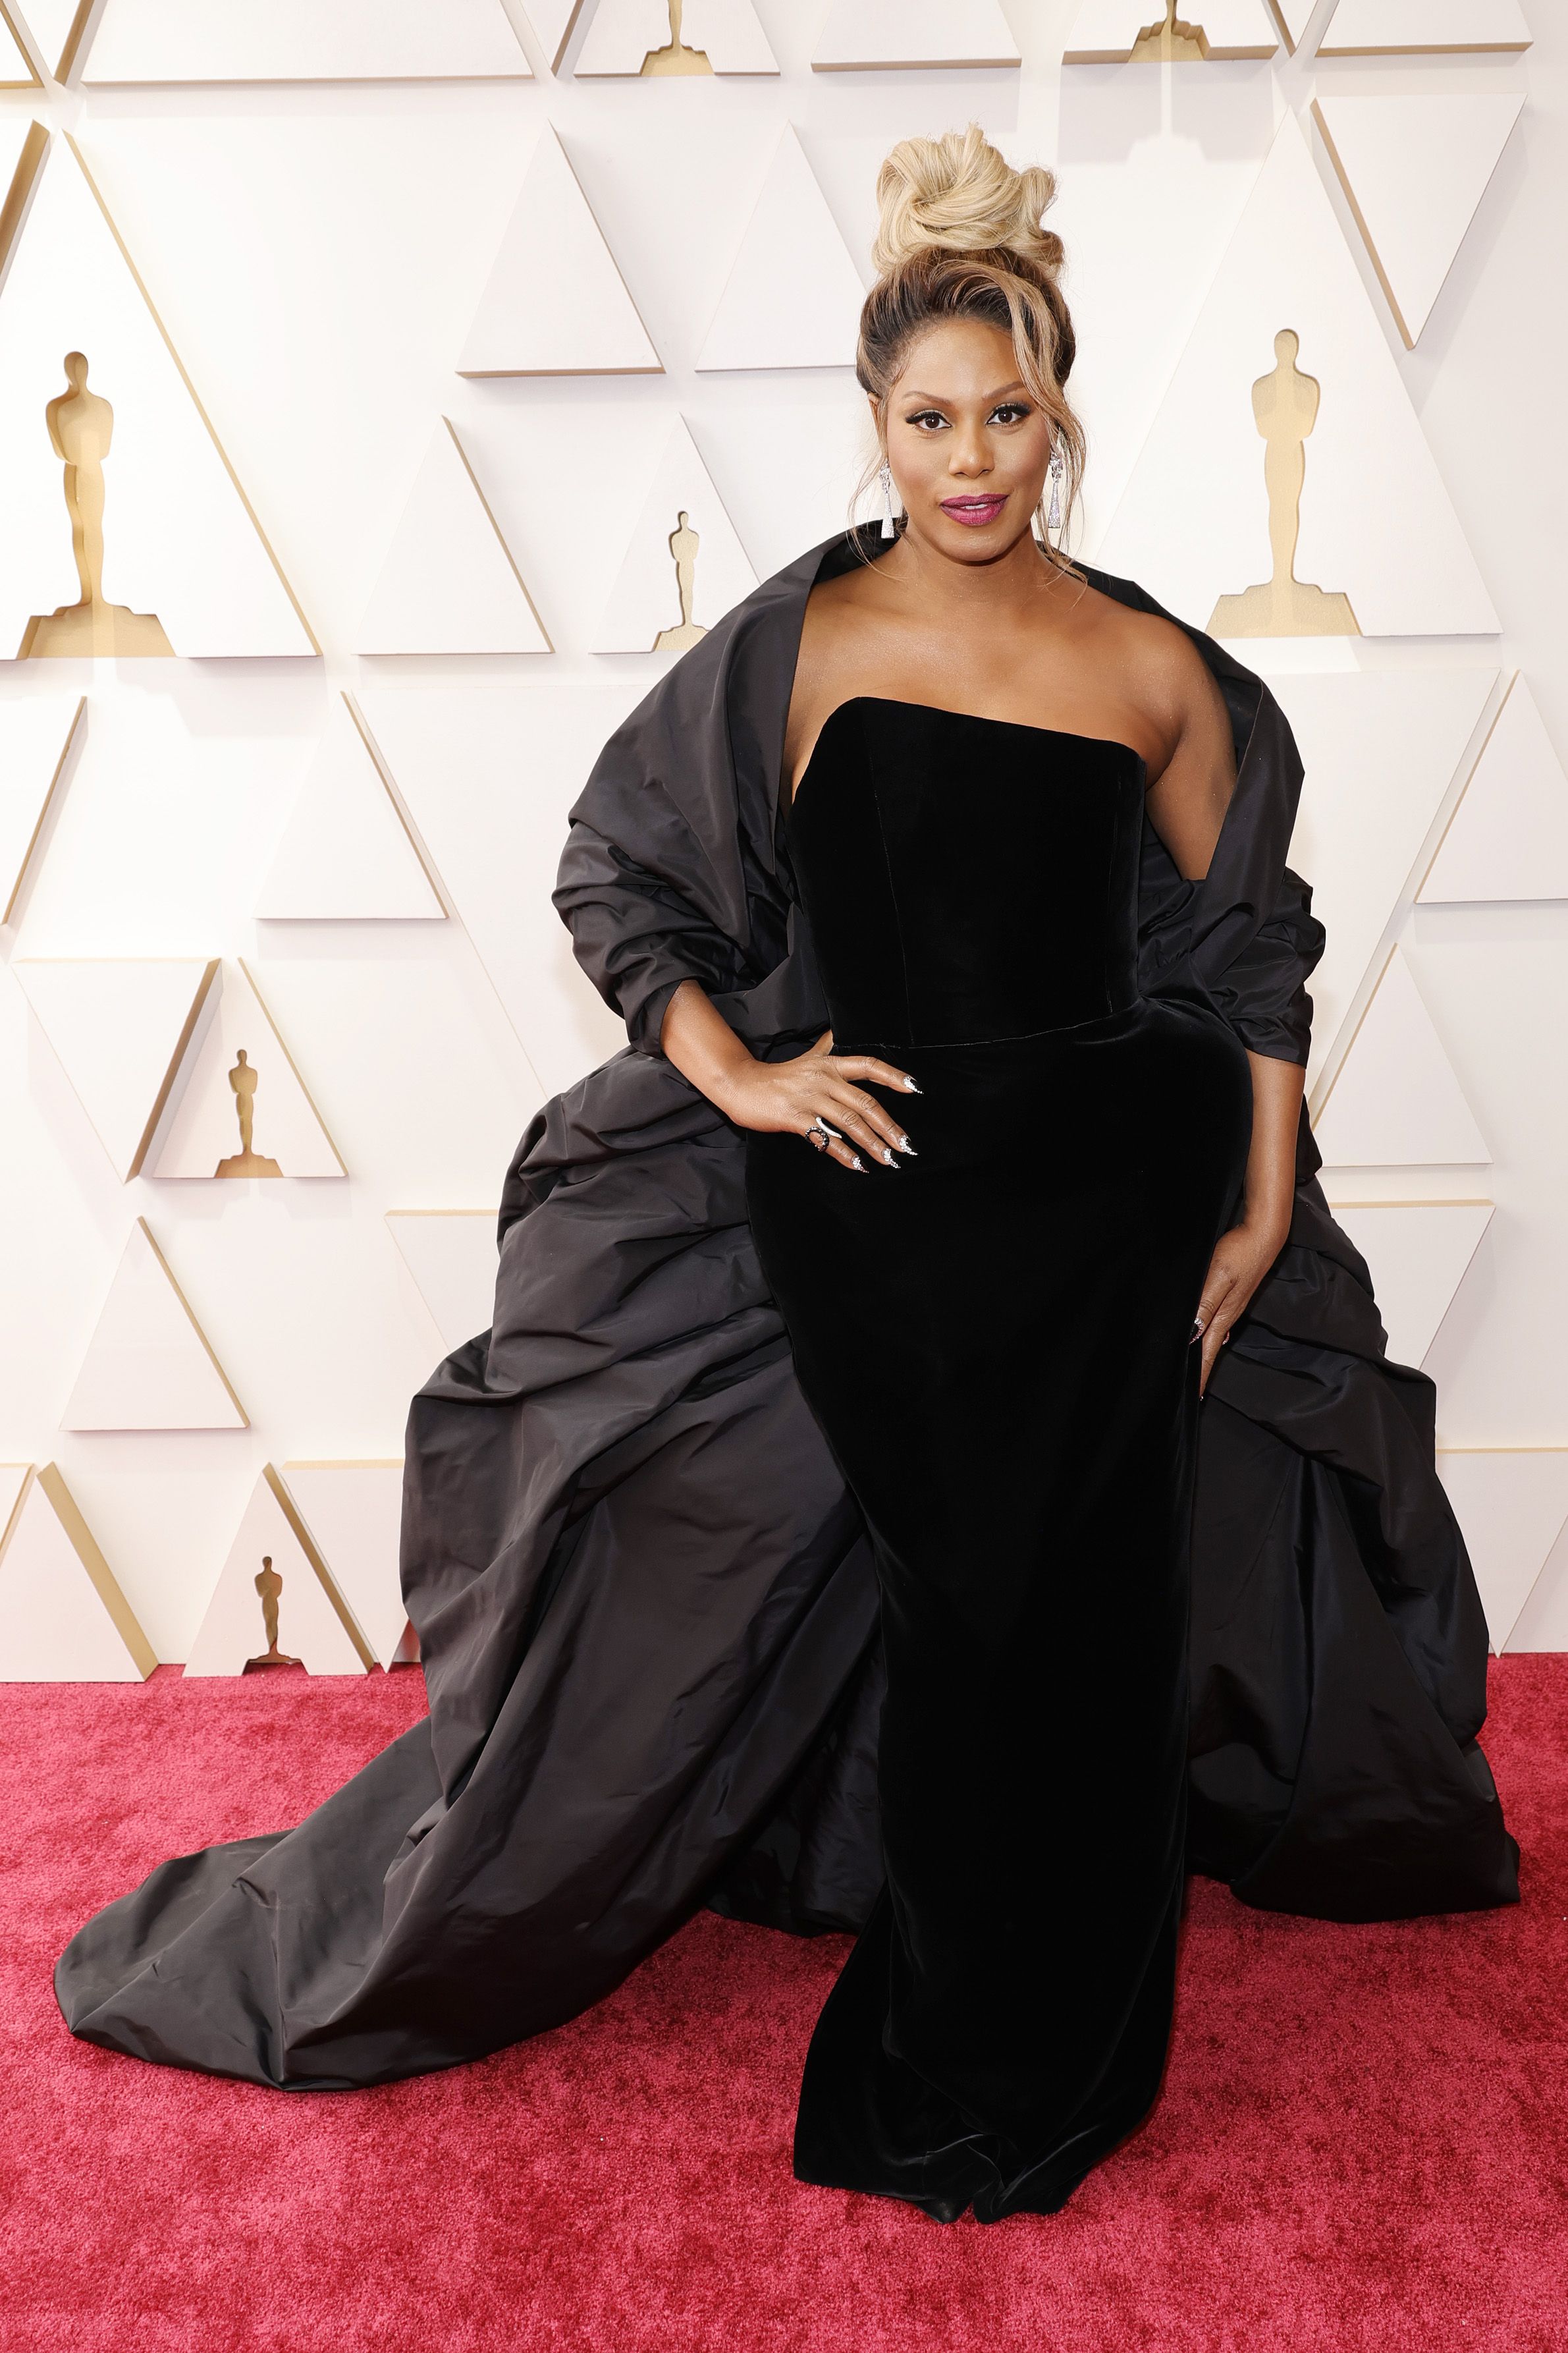 2022 Oscars Red Carpet Fashion: See All the Looks From This Year's Show